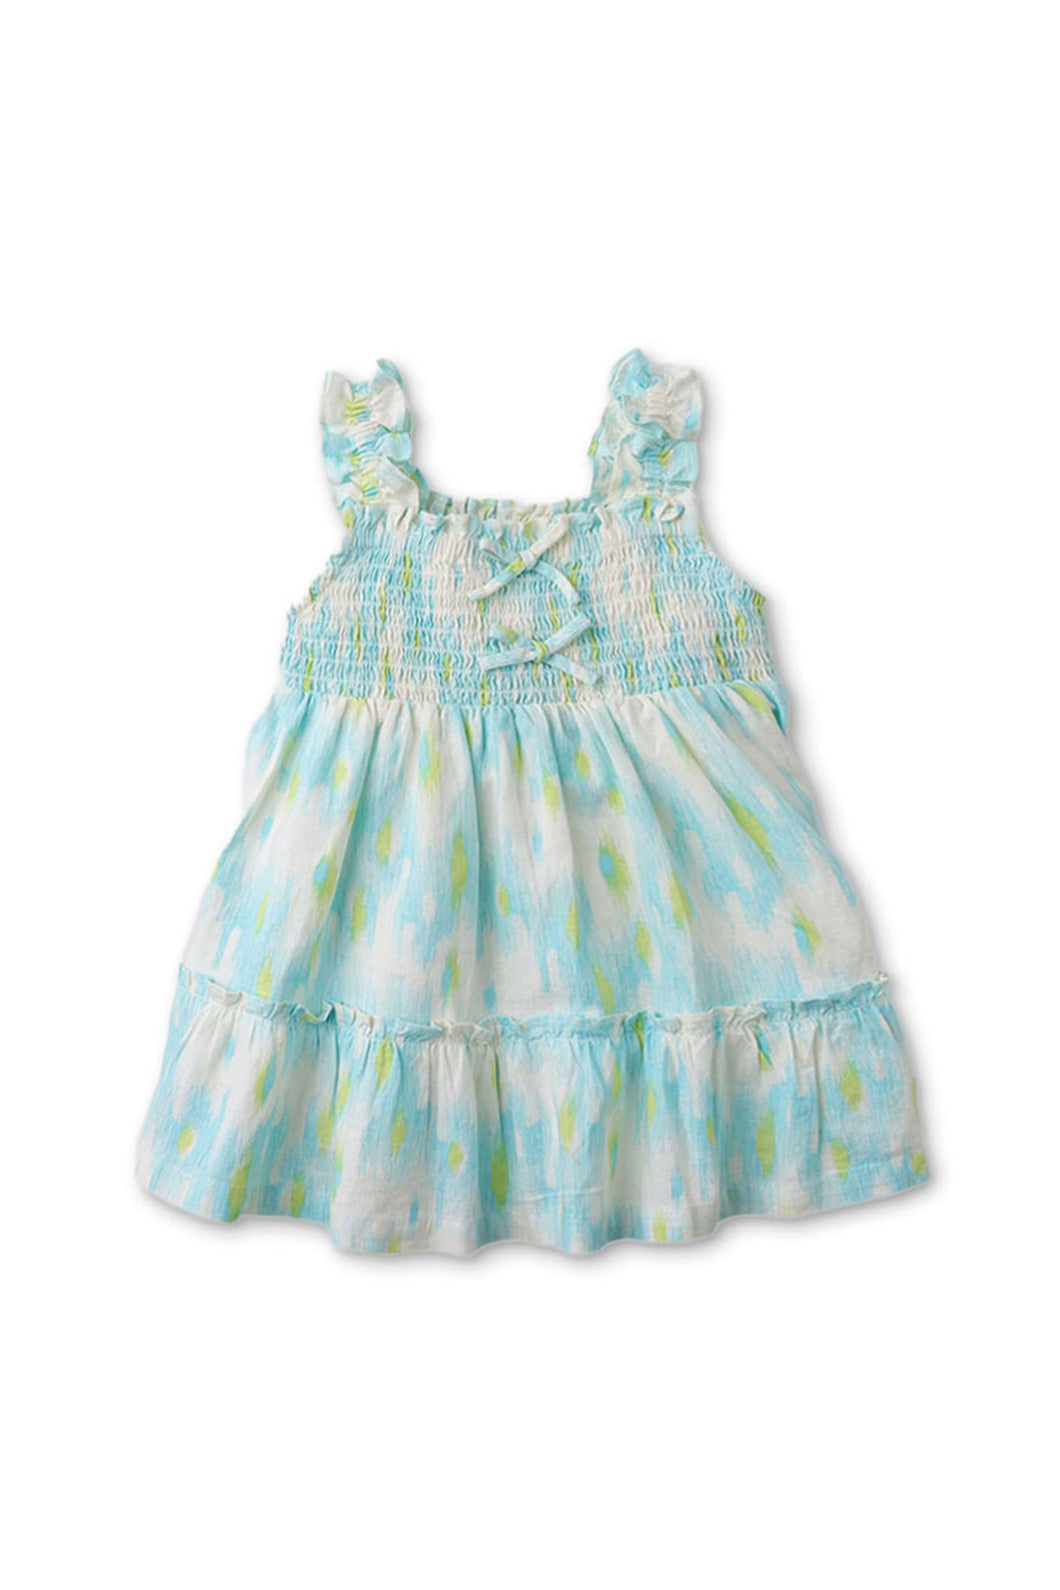 Gingersnaps Ikat Print Smocked Dress with Bow